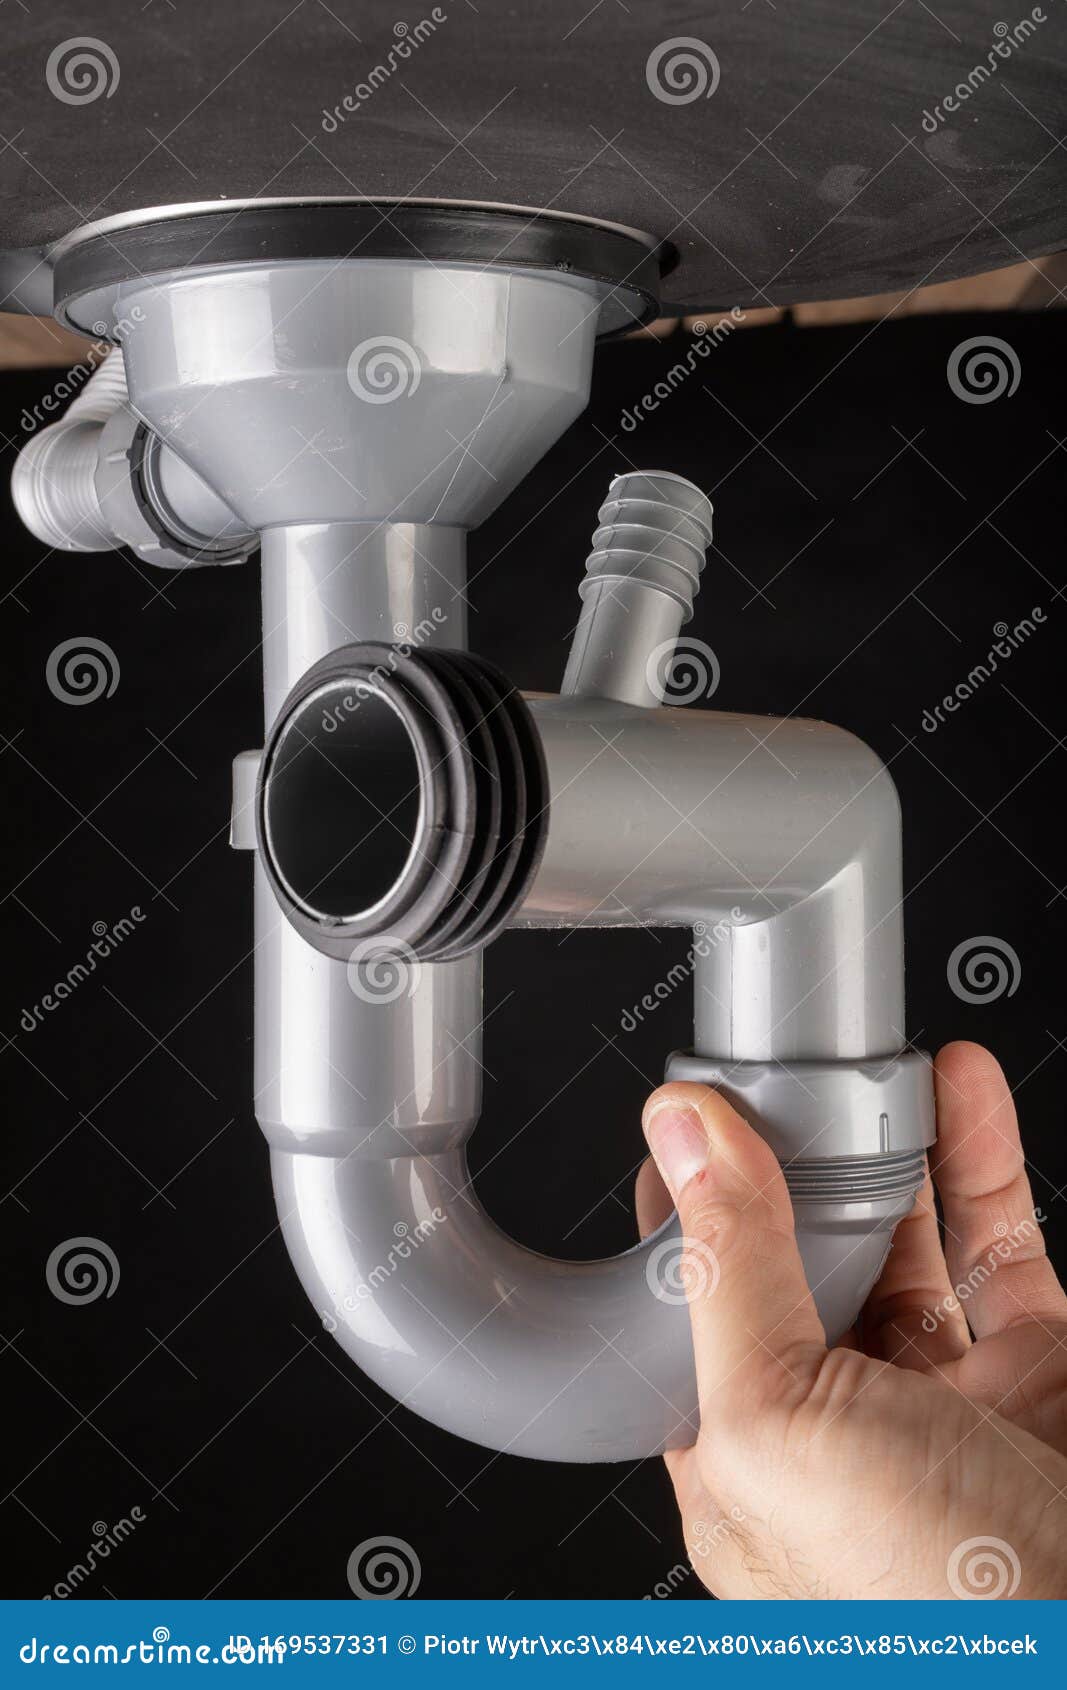 Repair Of The Plastic Siphon Under The Kitchen Sink Drain Installation In A Home Kitchen Stock Image Image Of Installation Damaged 169537331